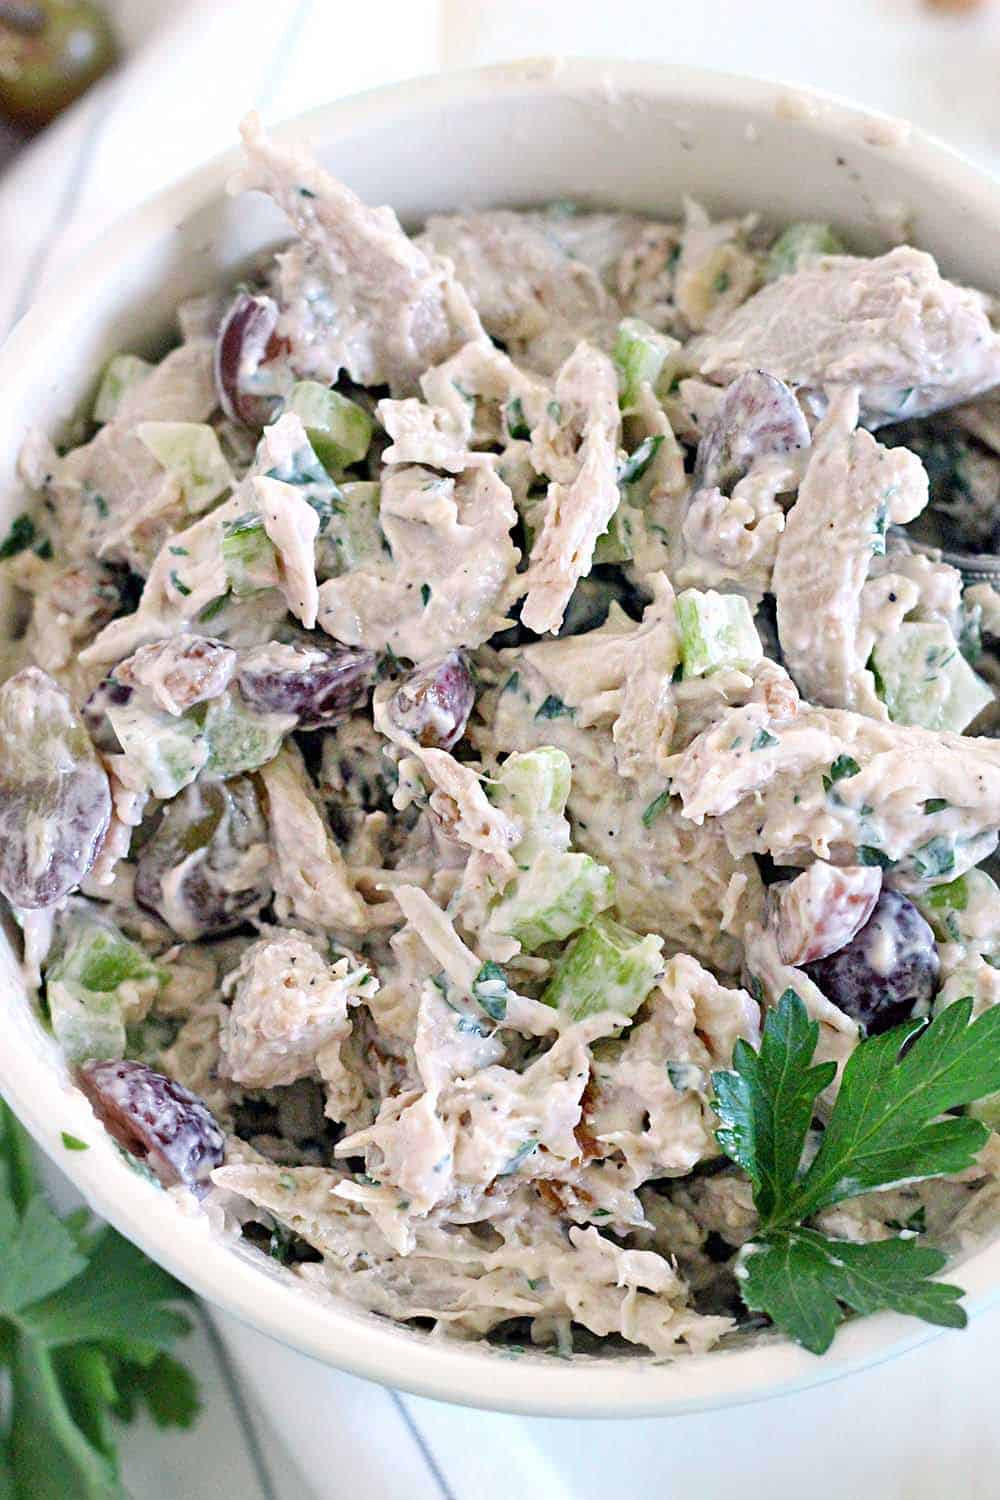 Easy Chicken Salad Recipe With Grapes
 Awesome Chicken Salad with grapes and walnuts